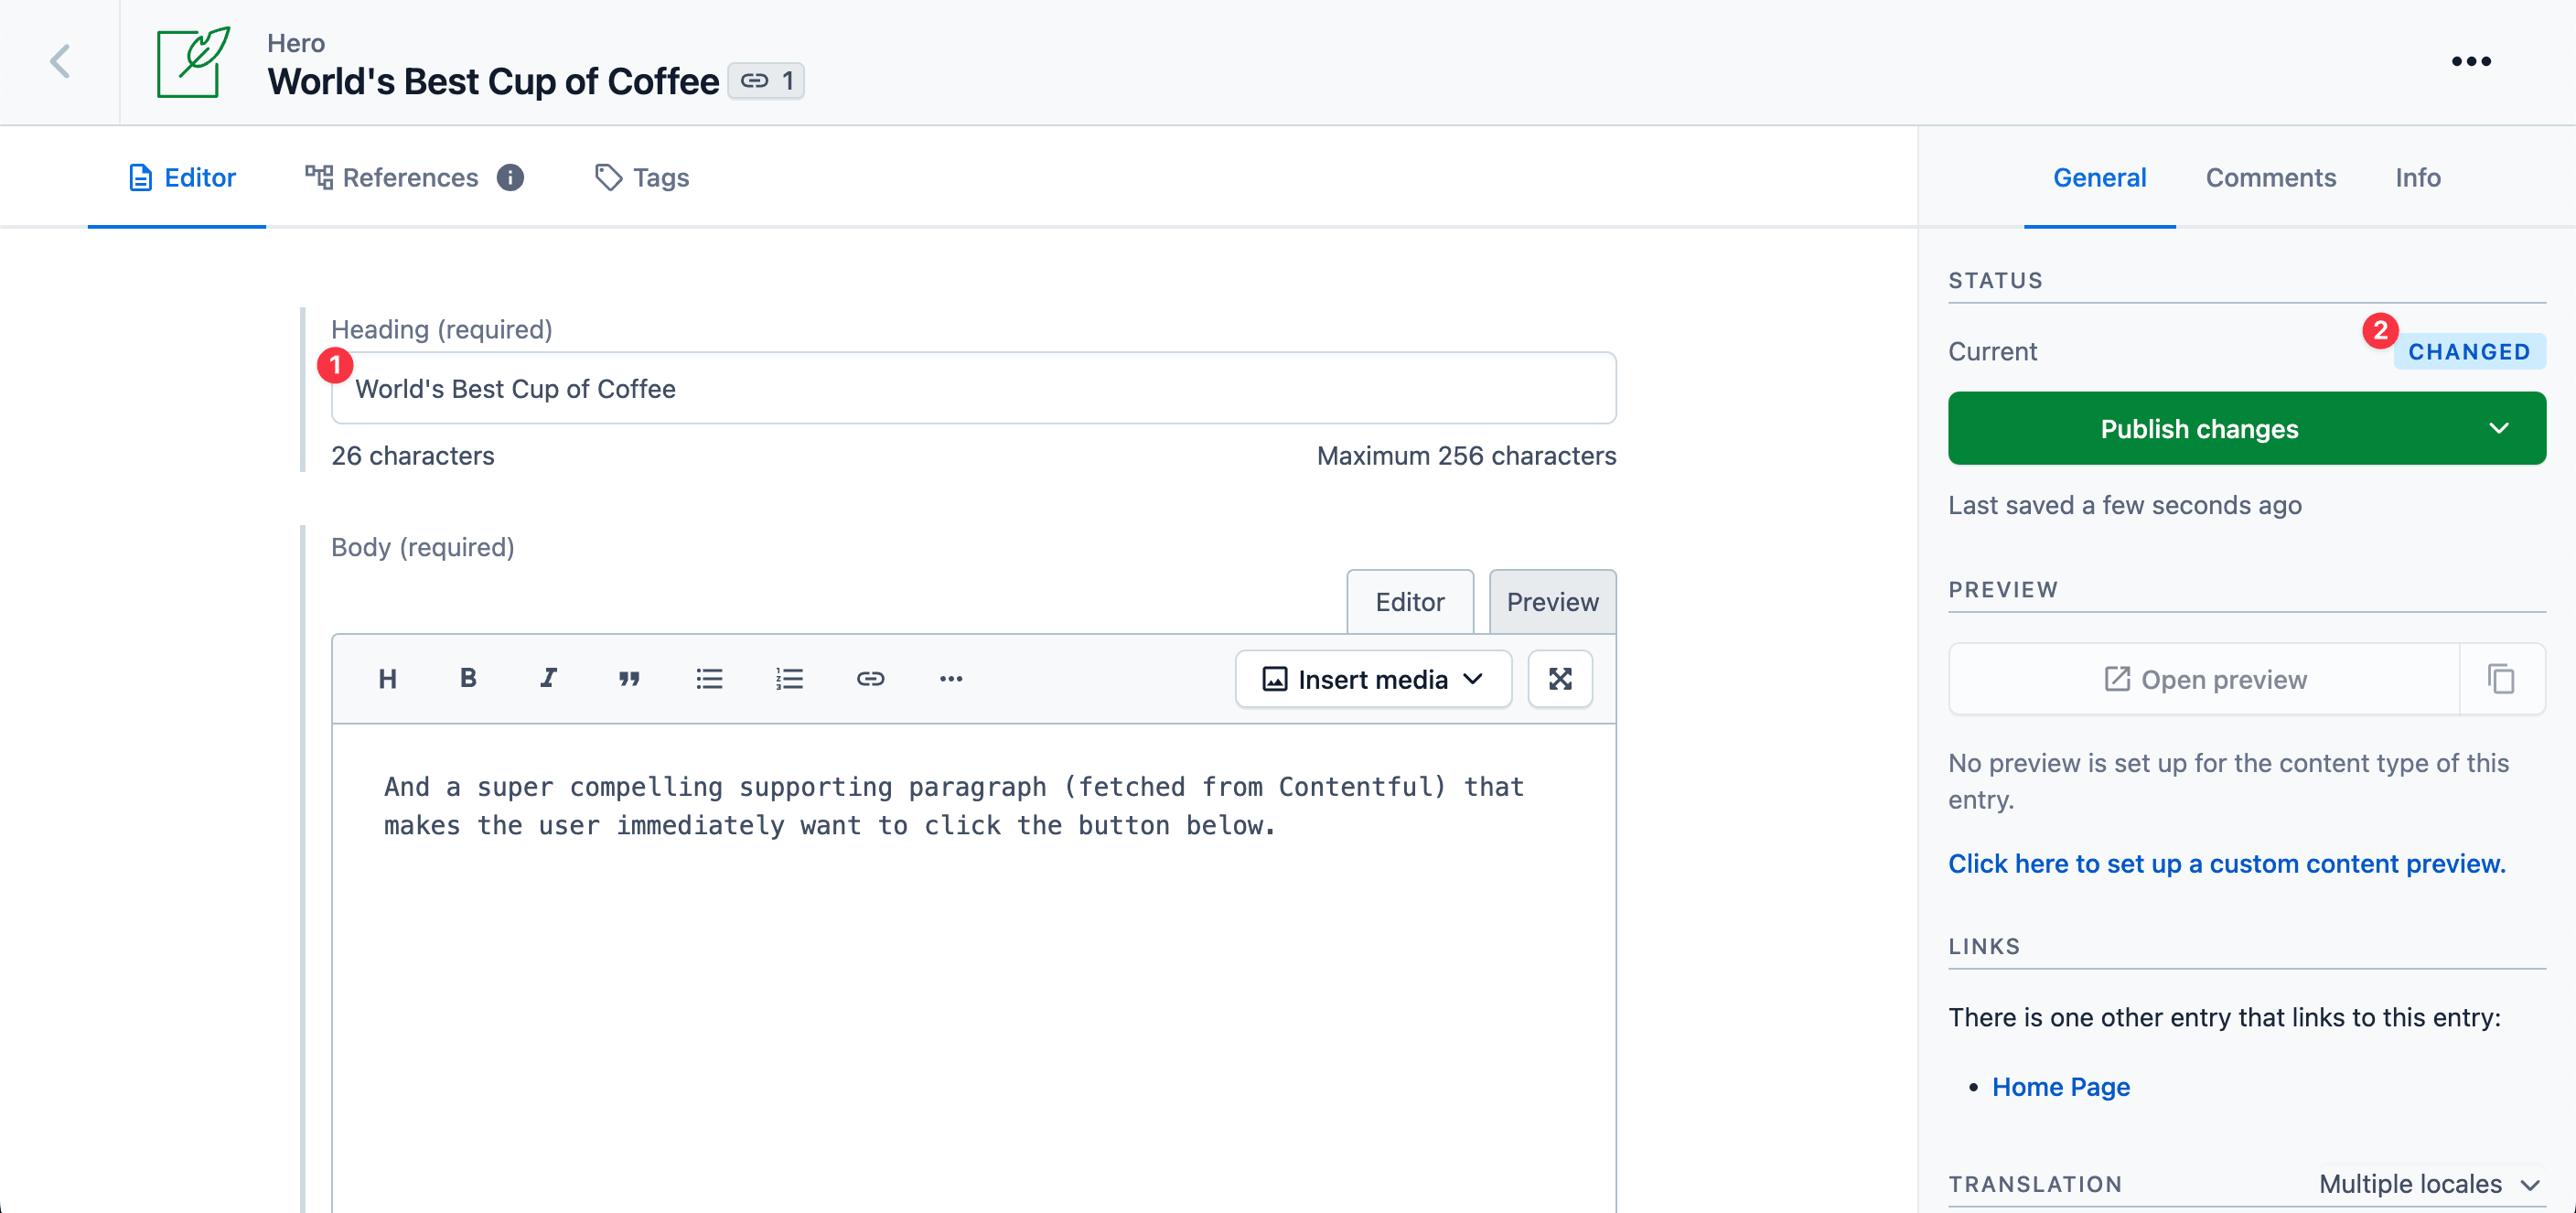 Updated content in Contentful.